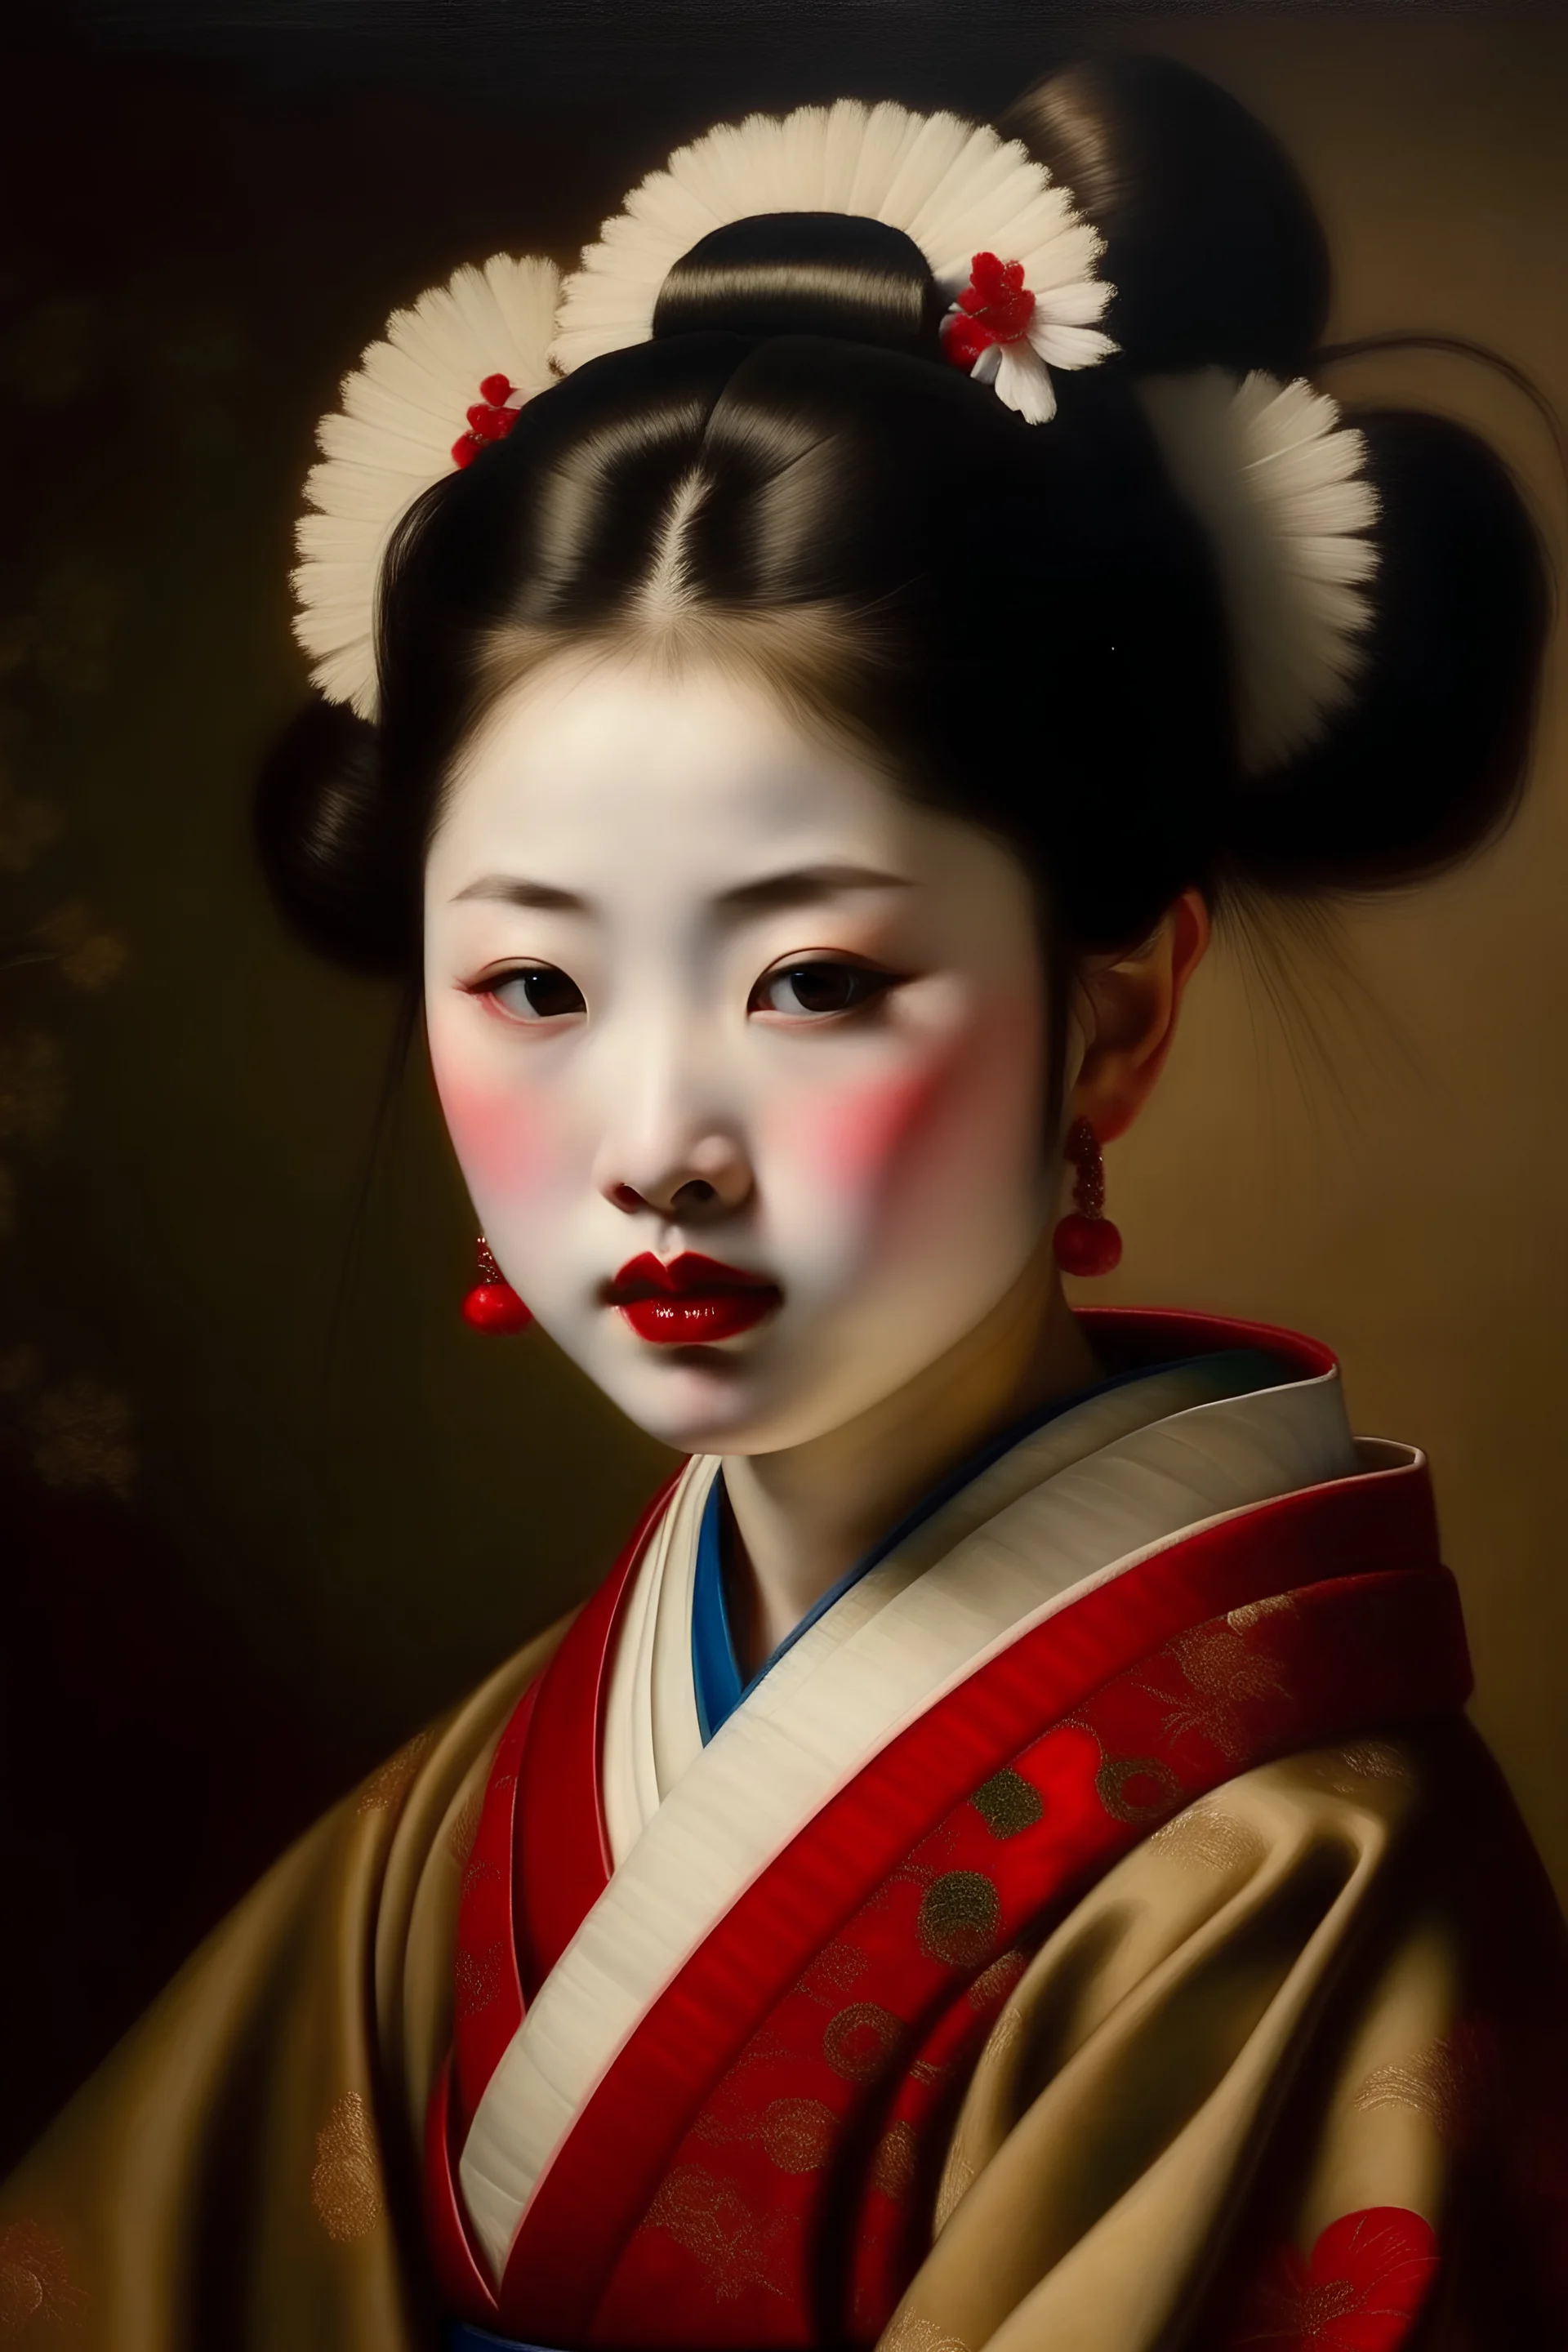 classic 1600s french oil painting of a young Japanese geisha with painted white face and red lipstick, wearing a elaborate red silk kimono